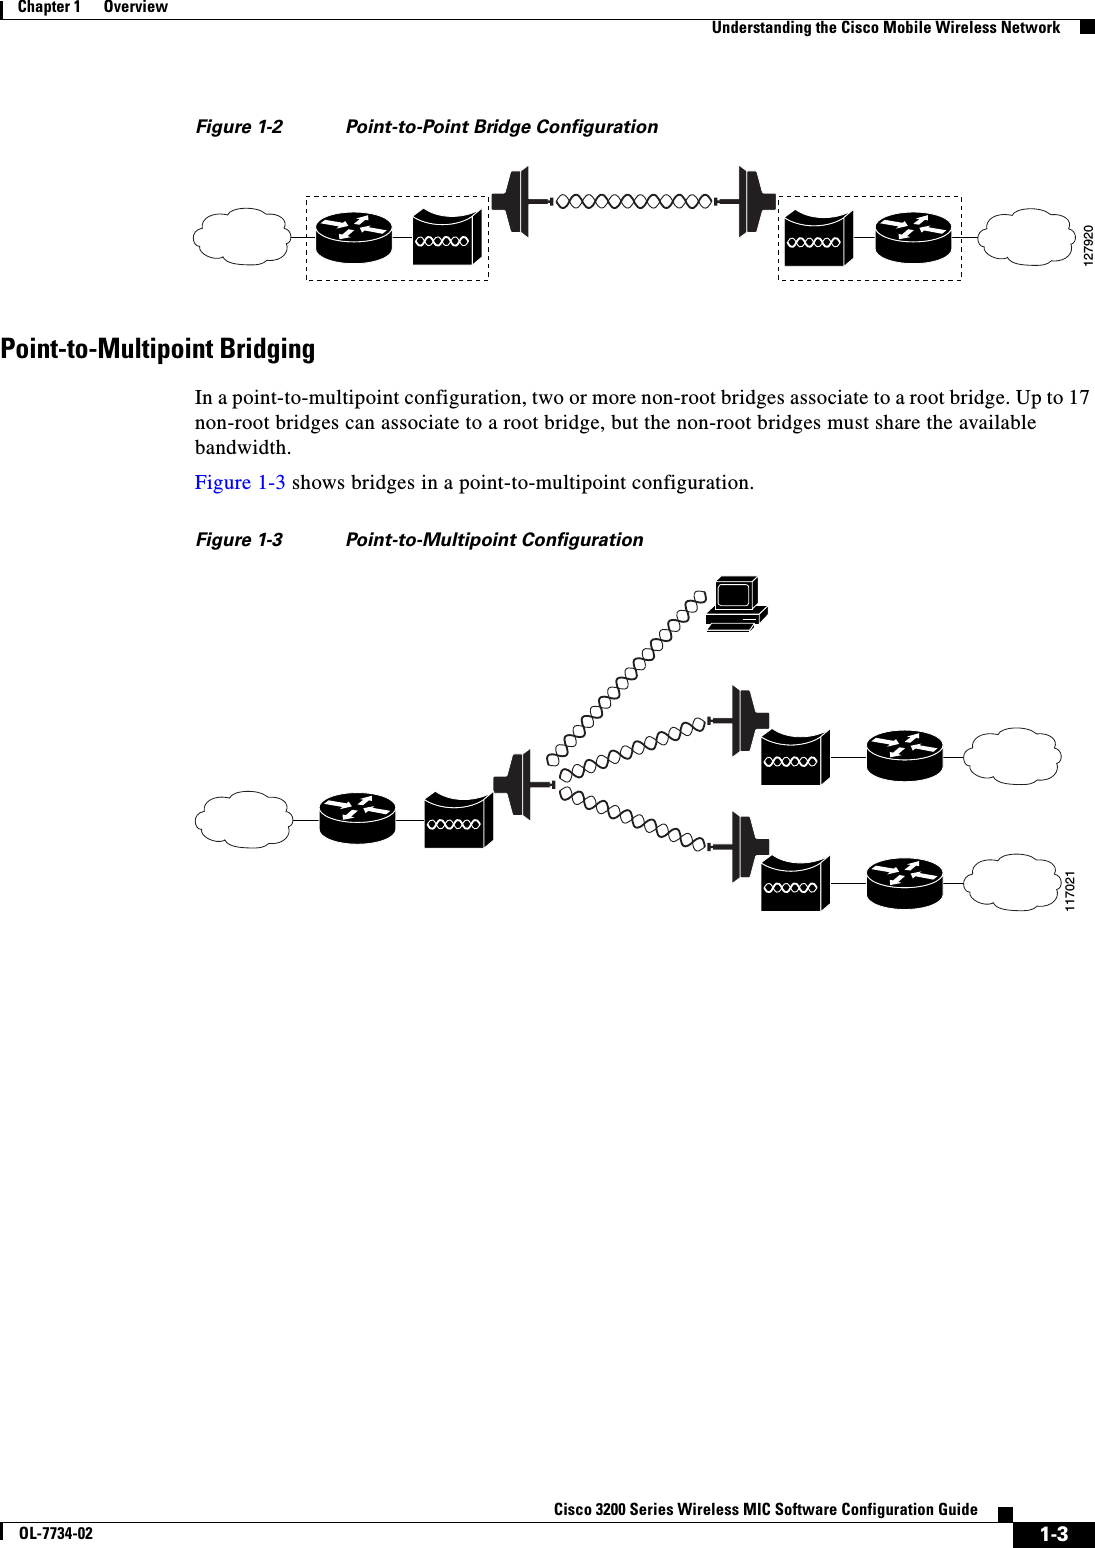 1-3Cisco 3200 Series Wireless MIC Software Configuration GuideOL-7734-02Chapter 1      OverviewUnderstanding the Cisco Mobile Wireless NetworkFigure 1-2 Point-to-Point Bridge ConfigurationPoint-to-Multipoint BridgingIn a point-to-multipoint configuration, two or more non-root bridges associate to a root bridge. Up to 17 non-root bridges can associate to a root bridge, but the non-root bridges must share the available bandwidth. Figure 1-3 shows bridges in a point-to-multipoint configuration. Figure 1-3 Point-to-Multipoint Configuration127920117021